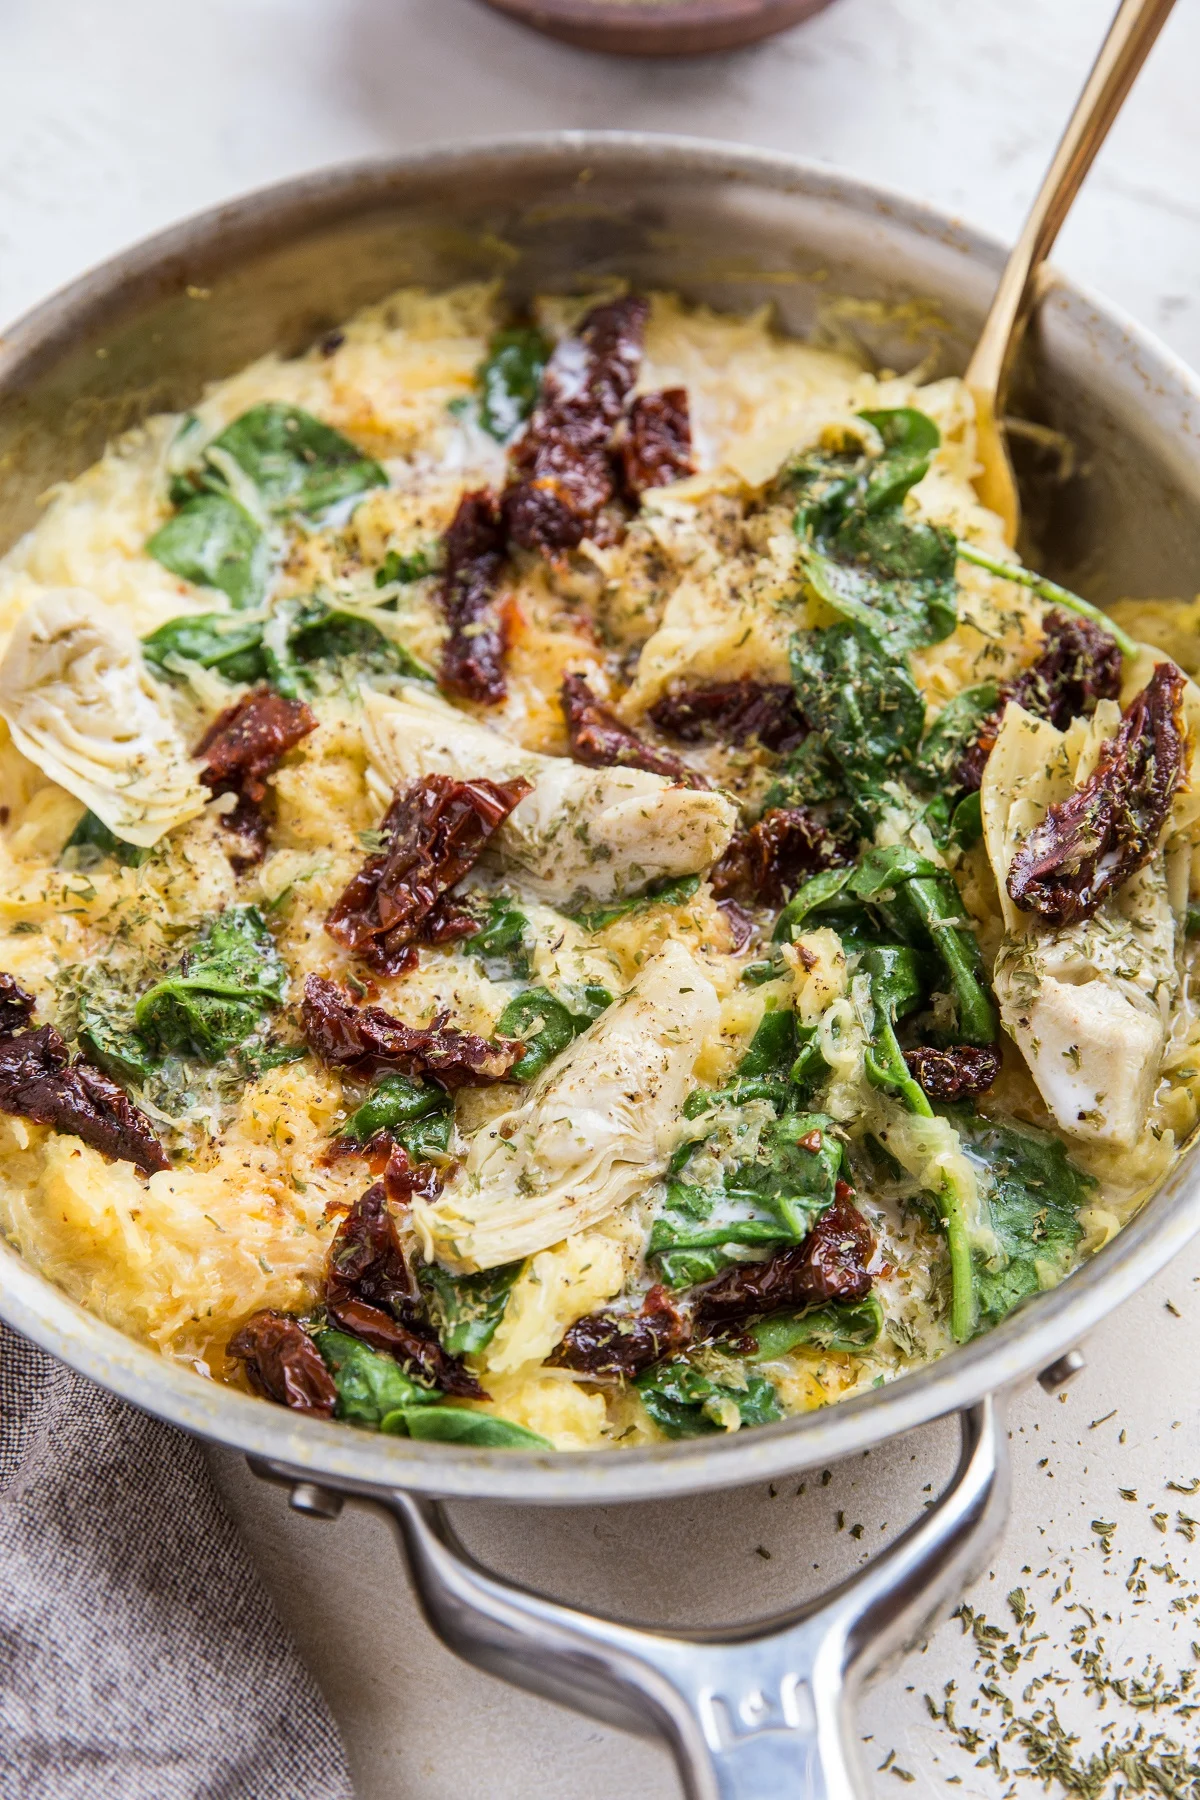 Creamy Tuscan Spaghetti Squash is a healthy flavorful entree or side dish perfect for those who follow a whole food diet. Paleo, keto, vegan, whole30, gluten-free